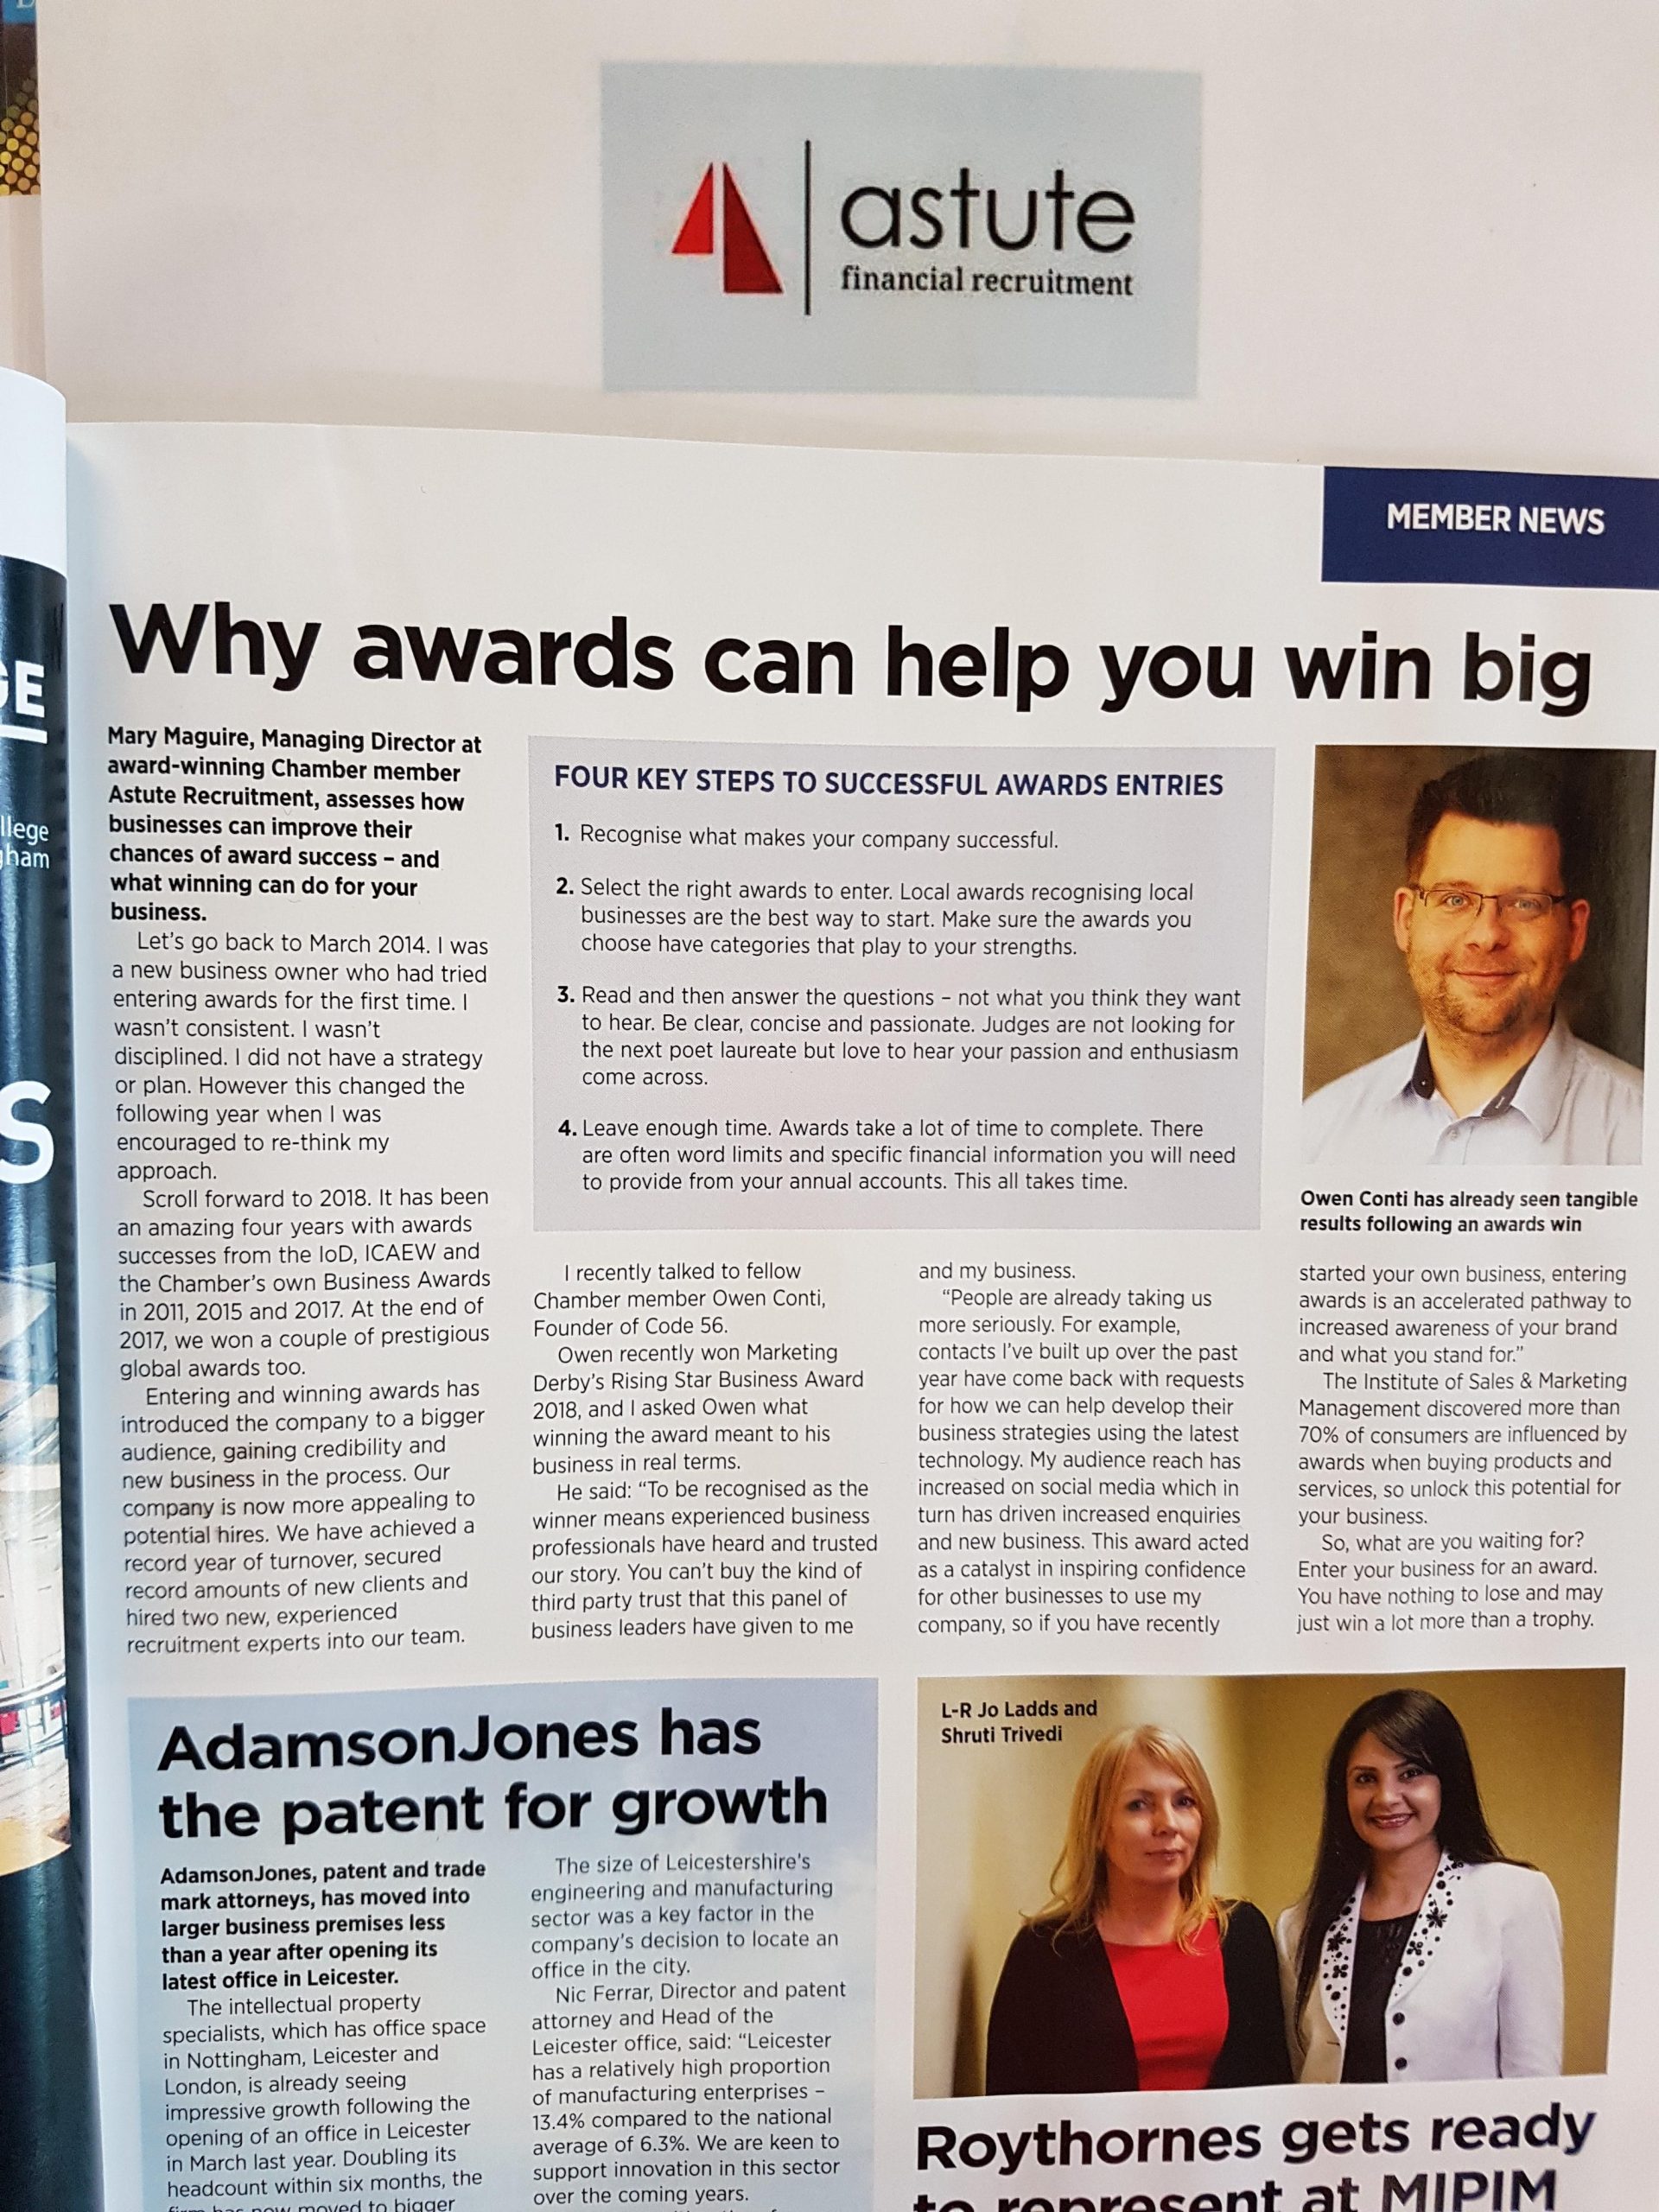 Why awards can help you win big. Some great advice for SME Business Owners.